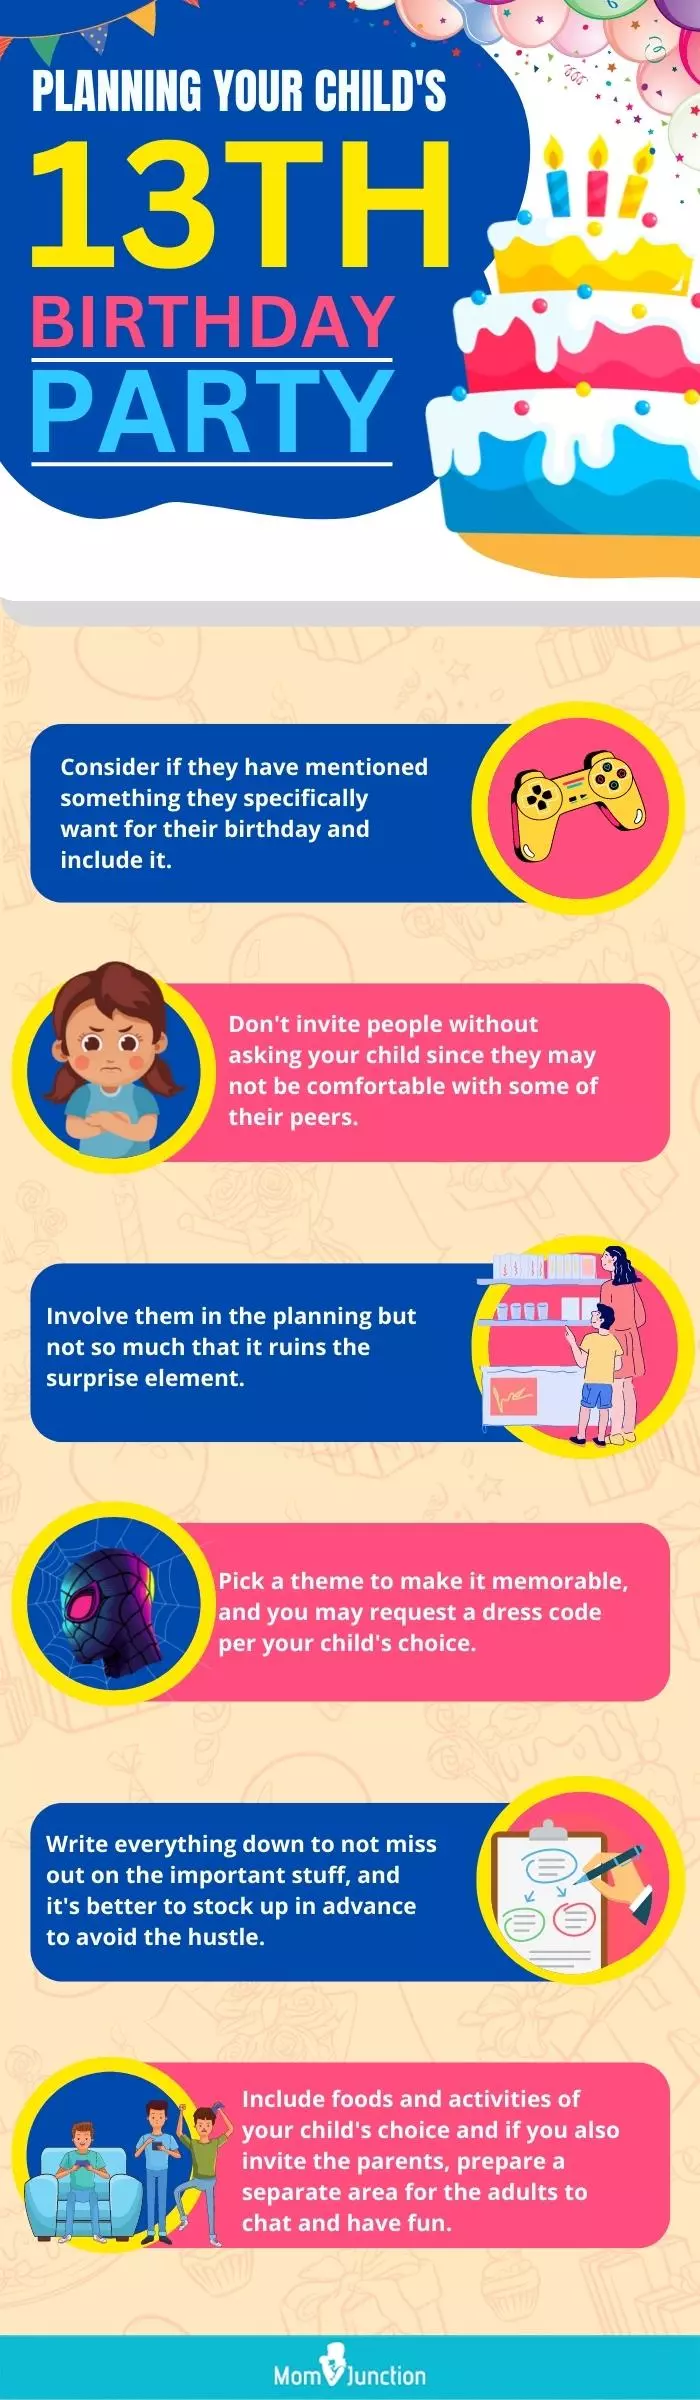 13th year old birthday party (infographic)